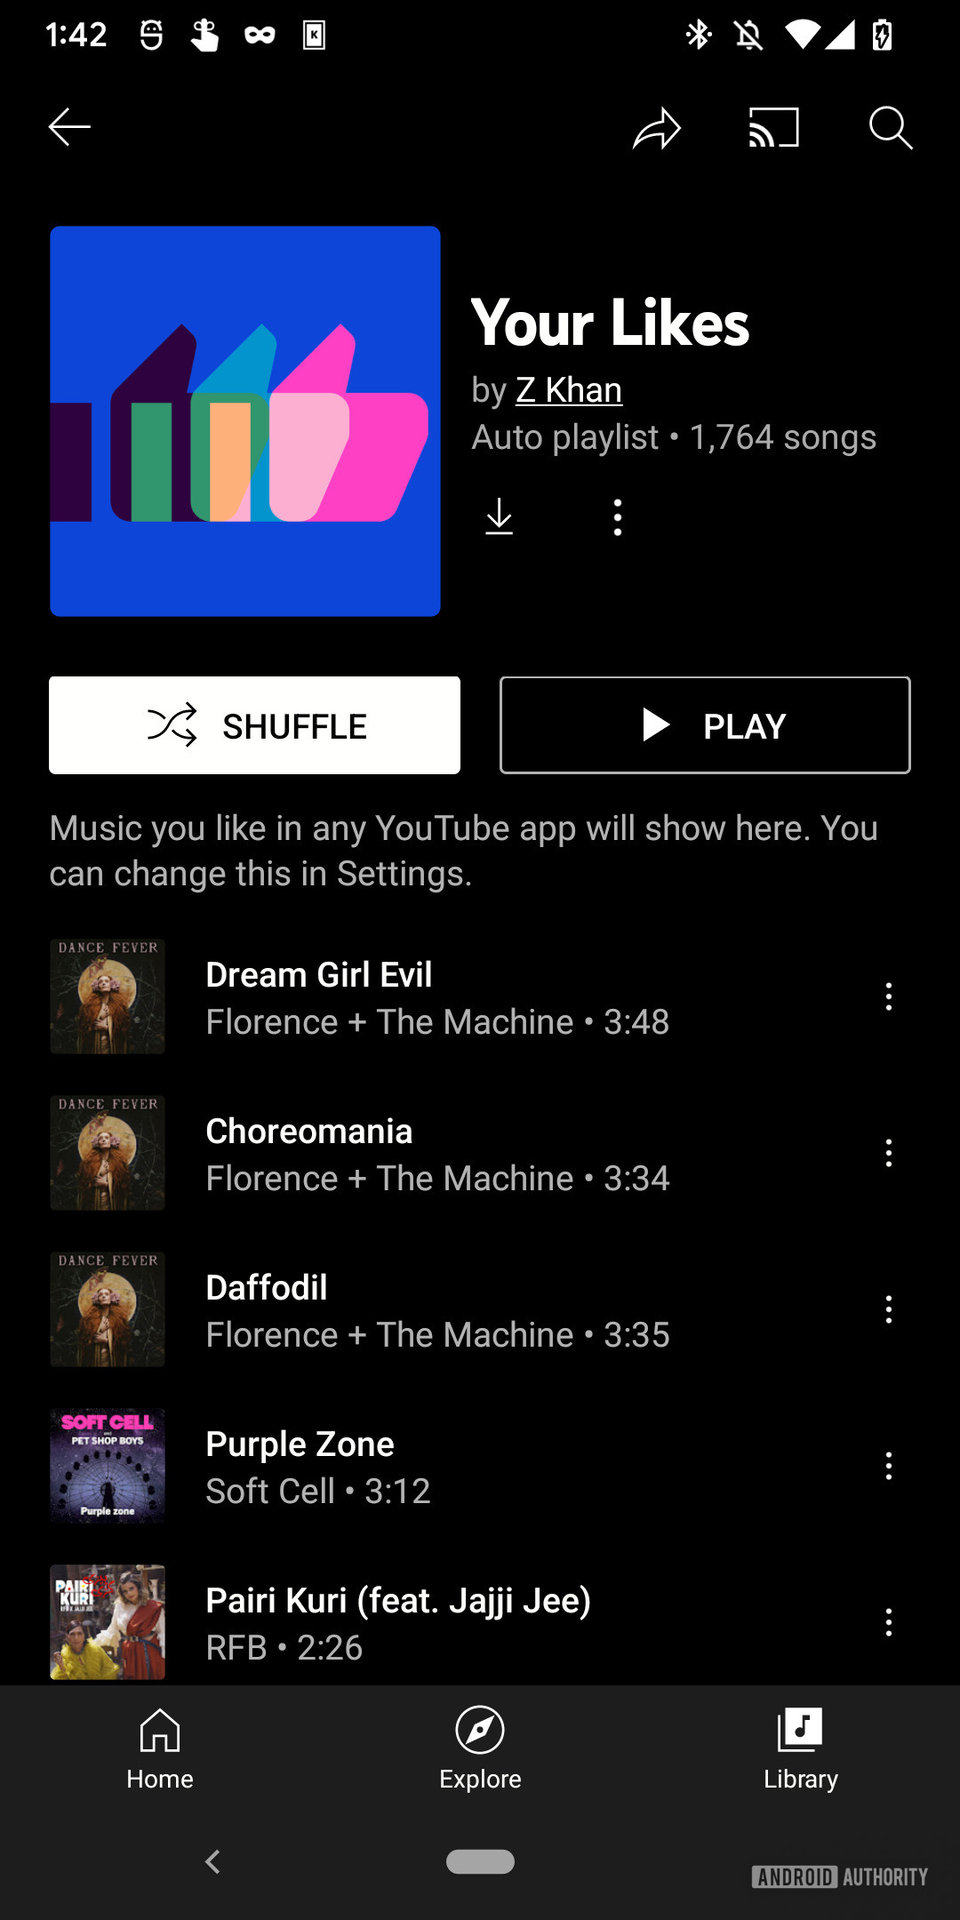 A screenshot of the YouTube Music app with a Premium subscription showing the "Your Likes" playlist.